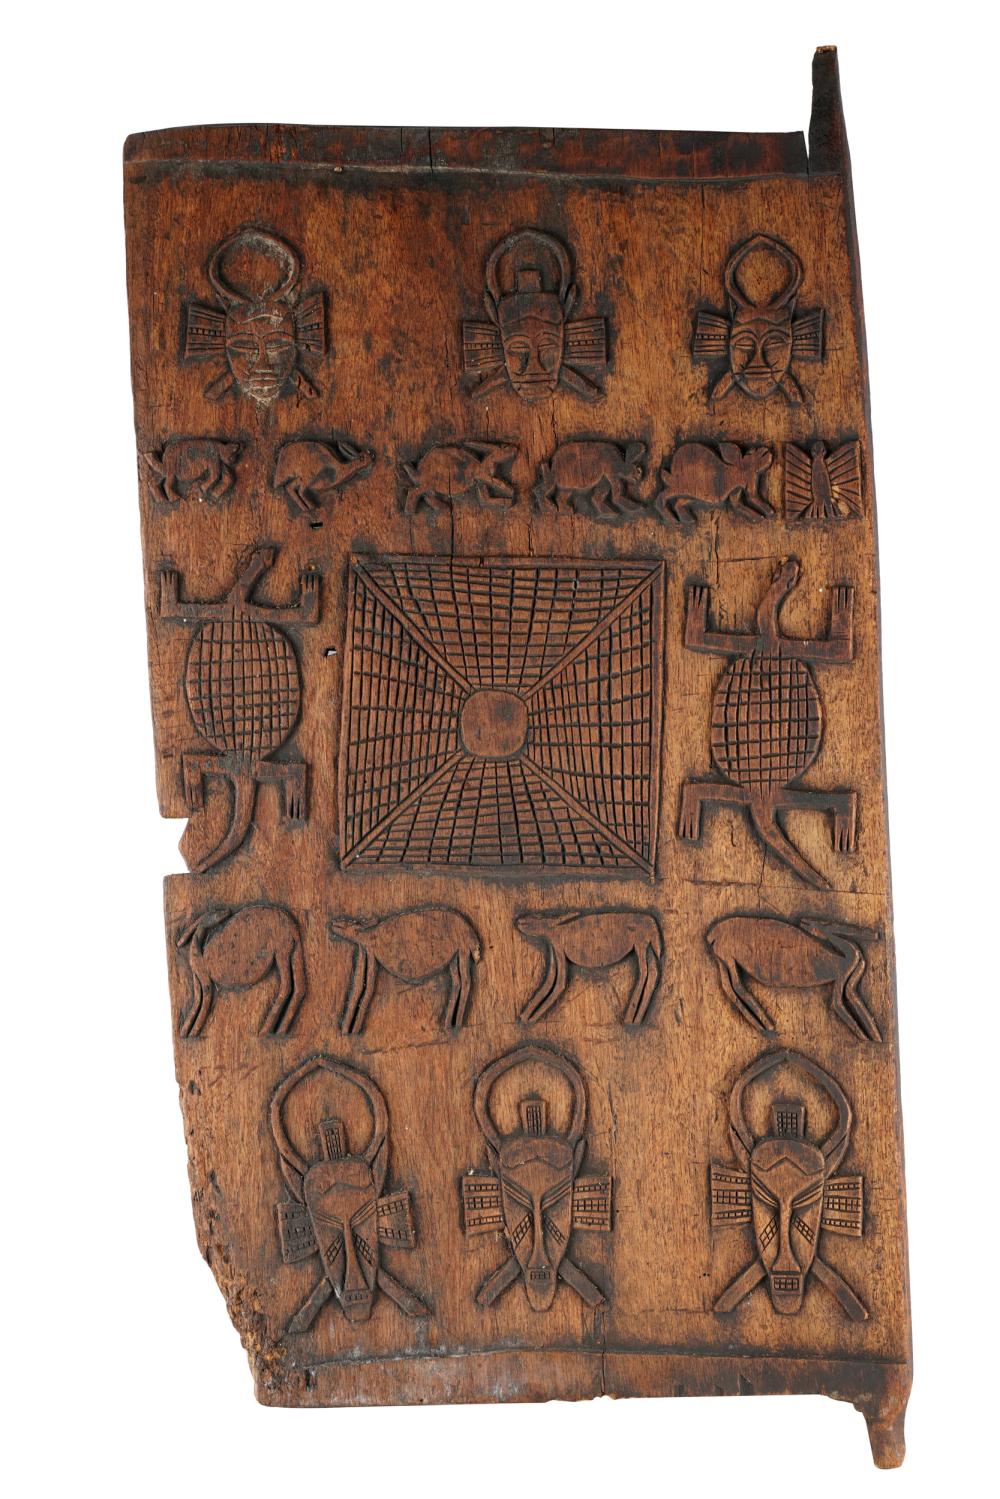 TRIBAL RELIEF-CARVED WOOD PANEL